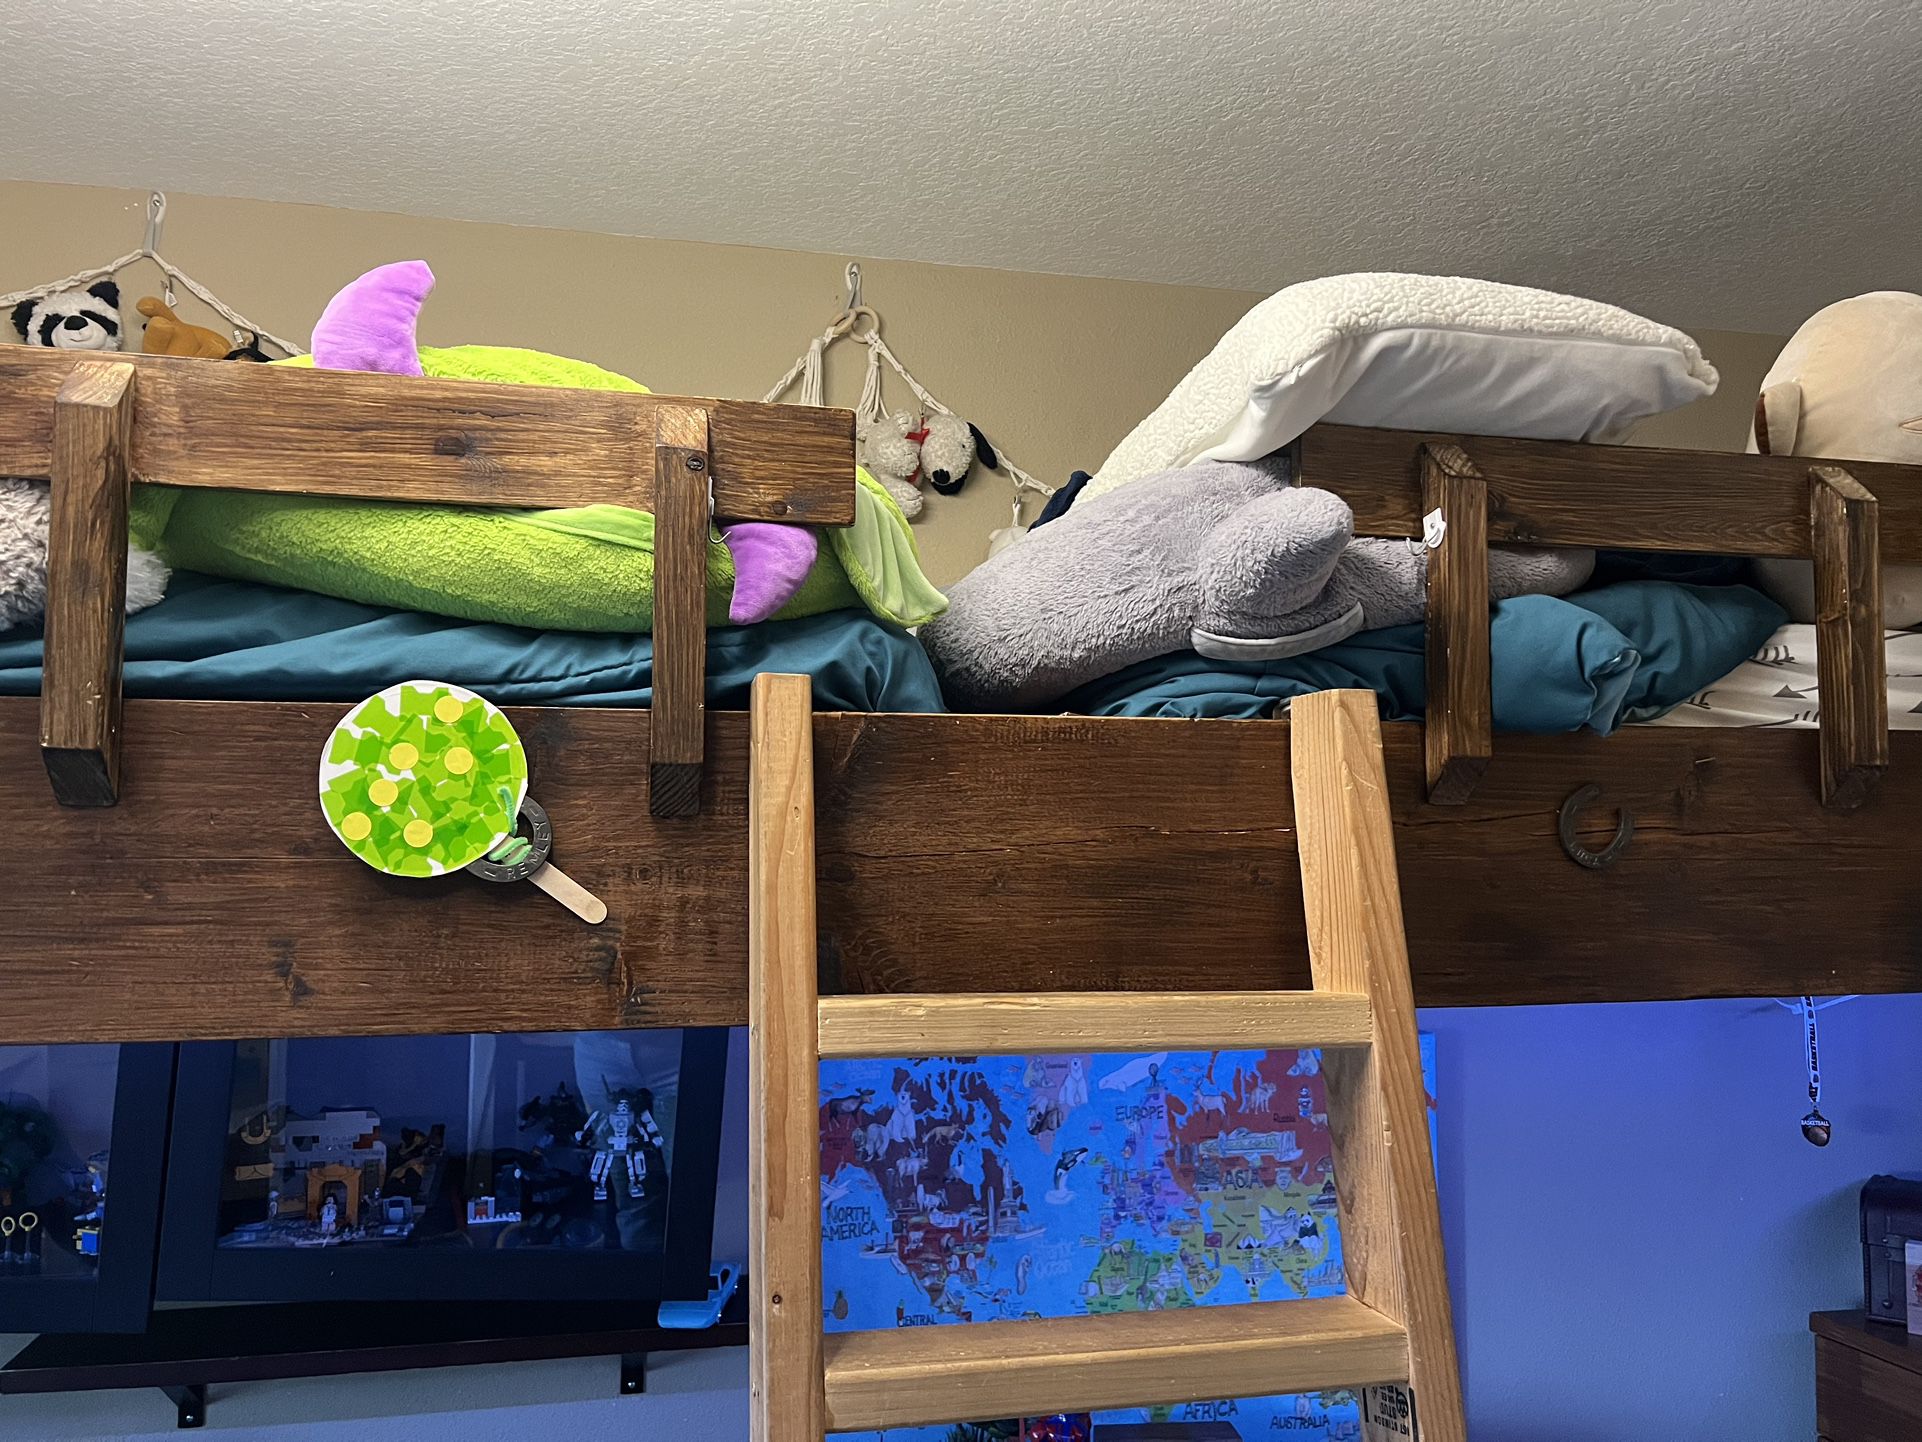 Loft Bed For Two Twins - Read Details 